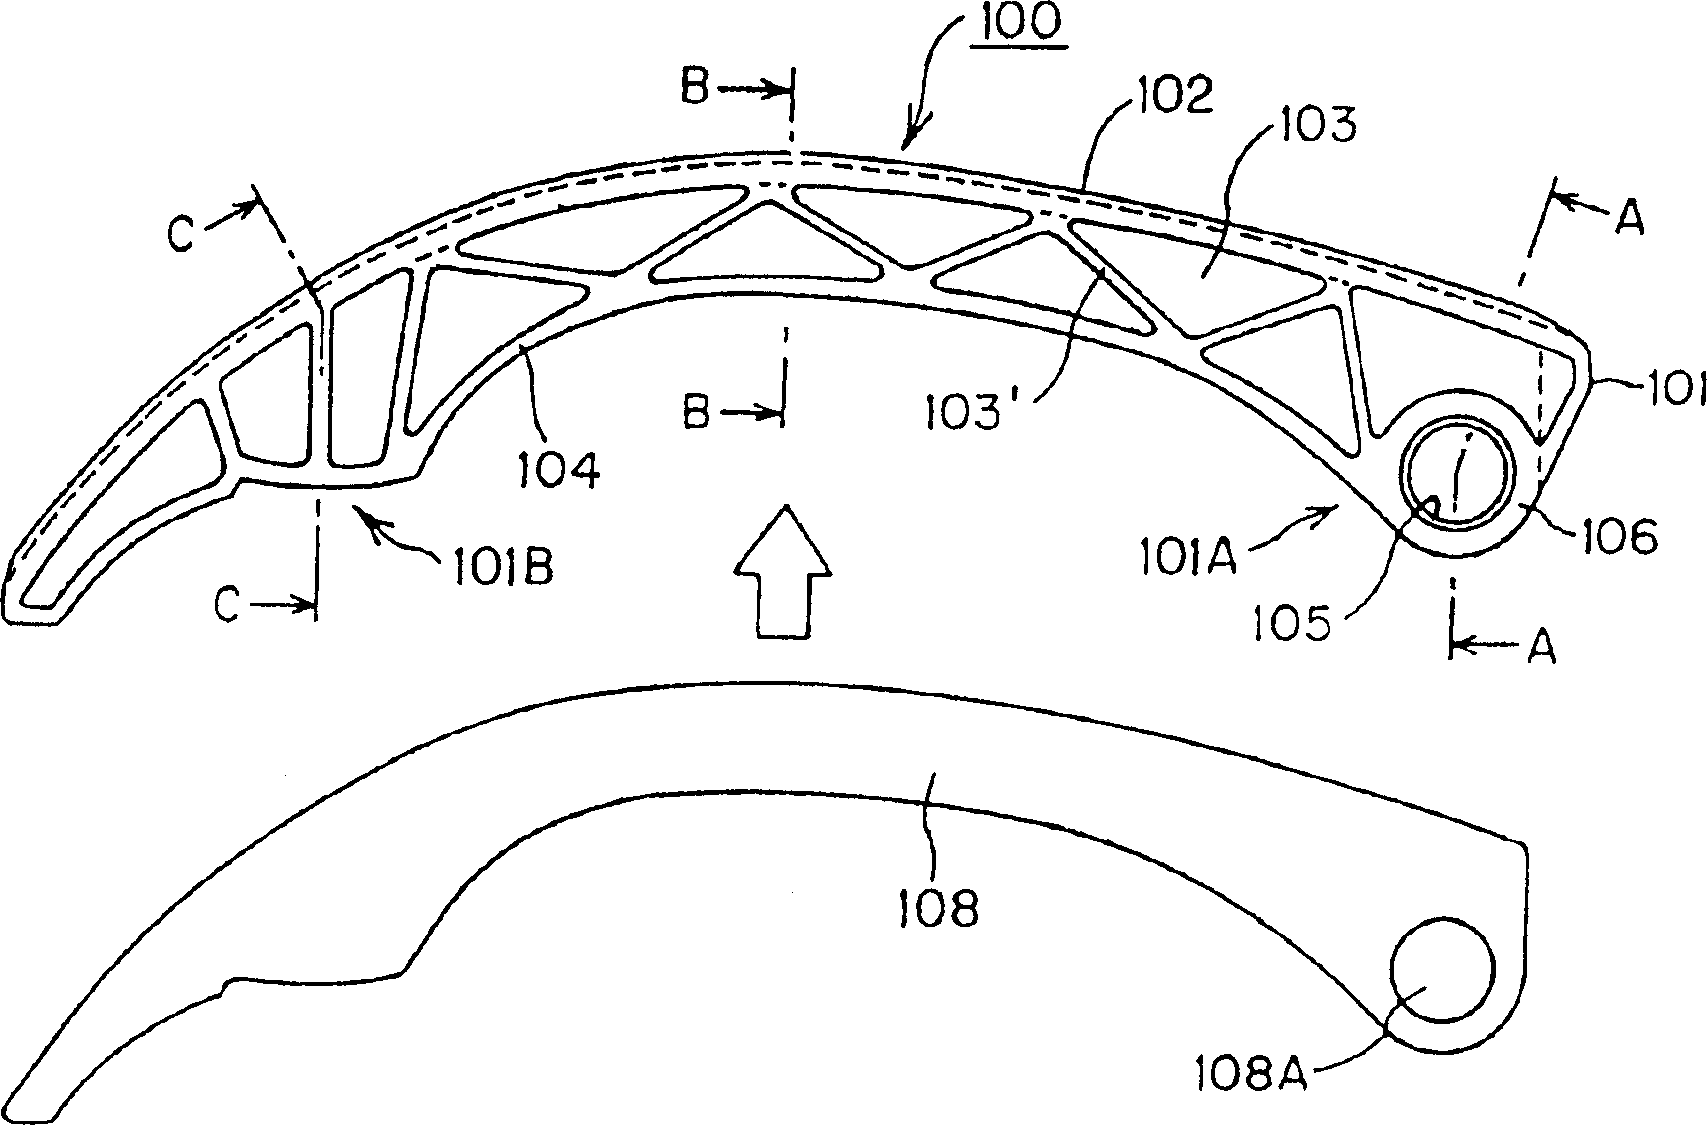 Plastic movable guide device for transmission